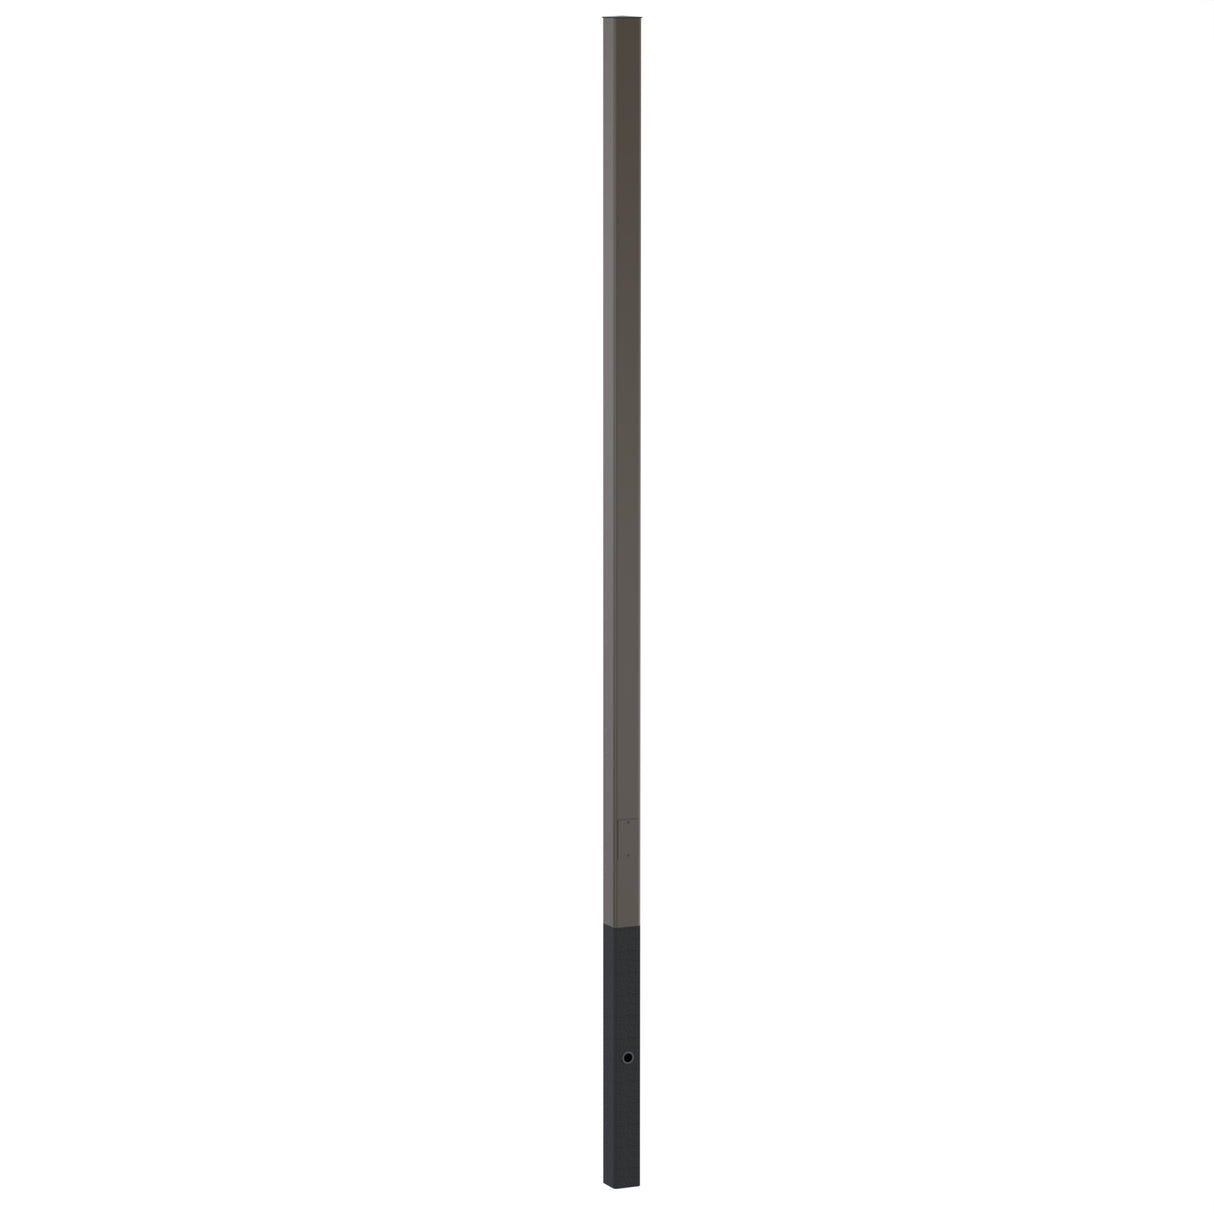 10' Above Grade x 4.0" OD  x 0.125" Thick, Square Straight Aluminum, Direct Burial Light Pole